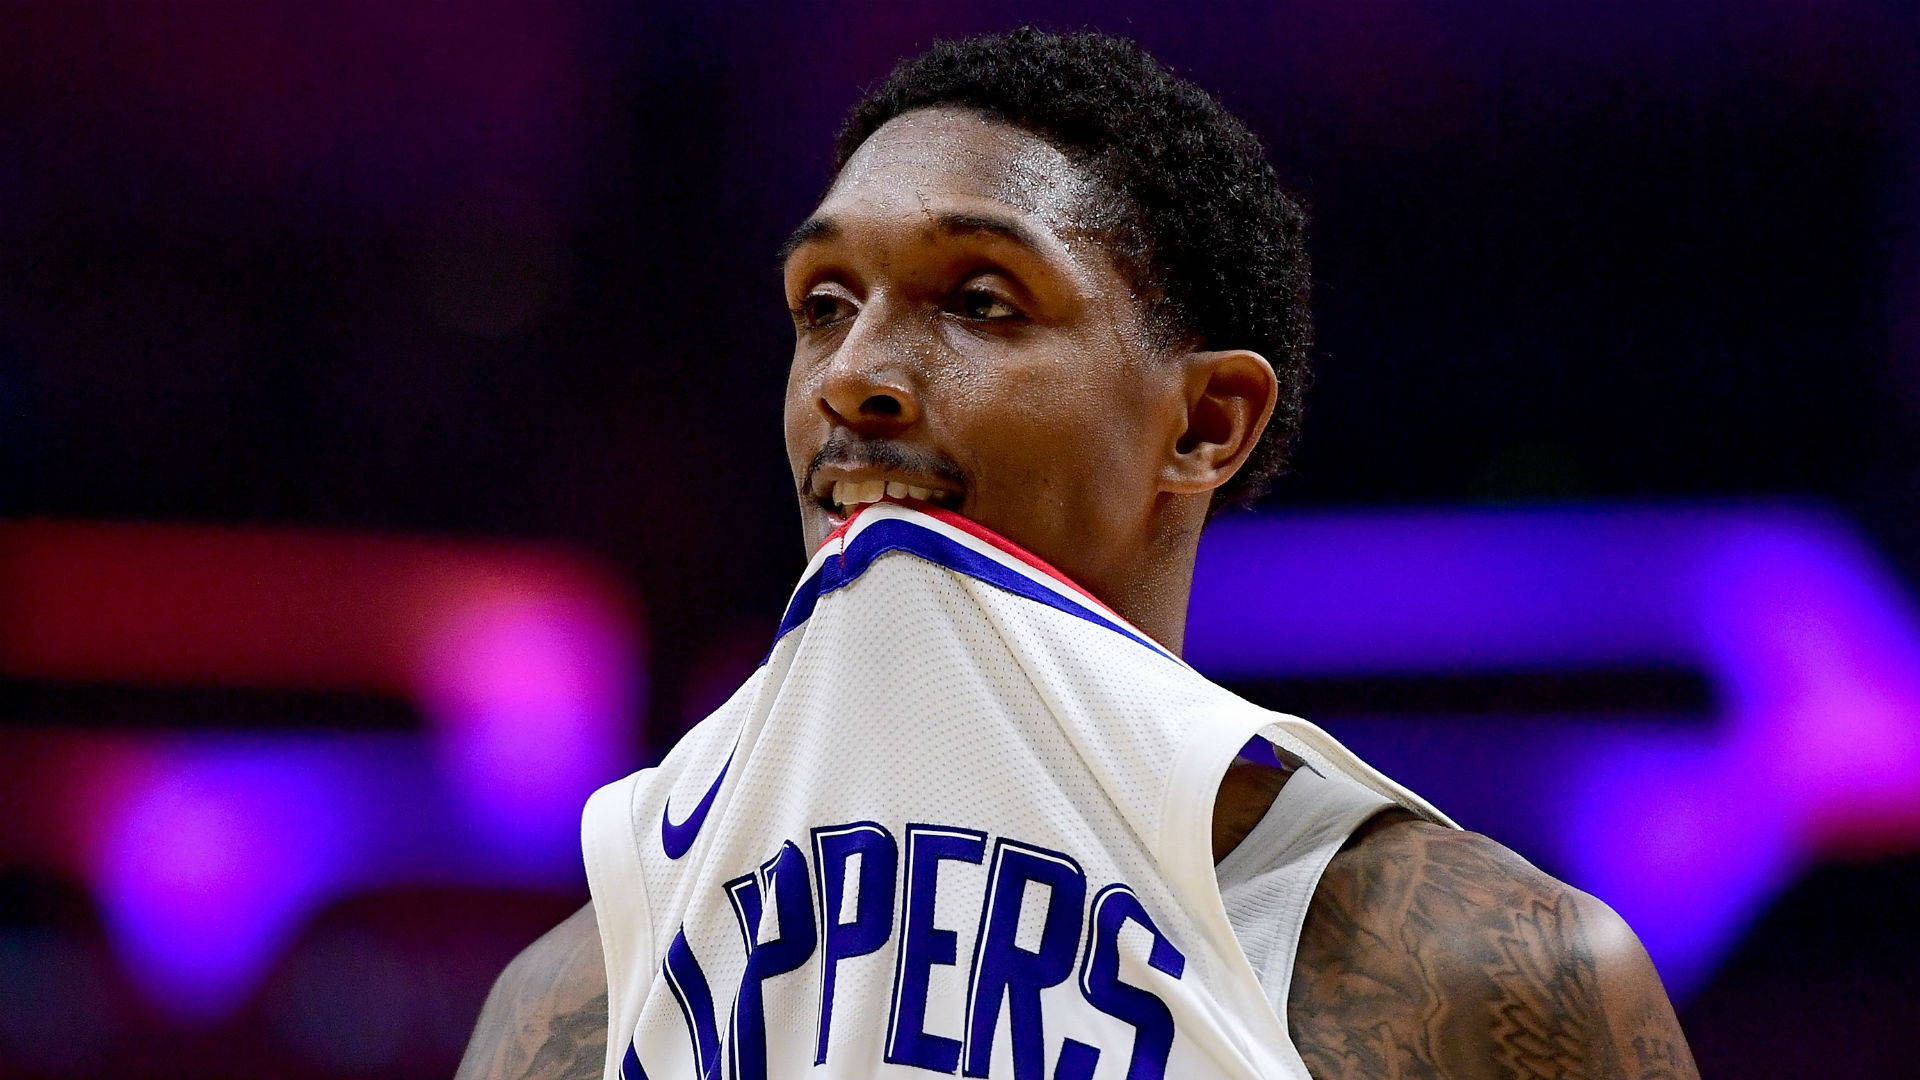 Download Lou Williams Bright Blue Clippers Jersey Wallpaper